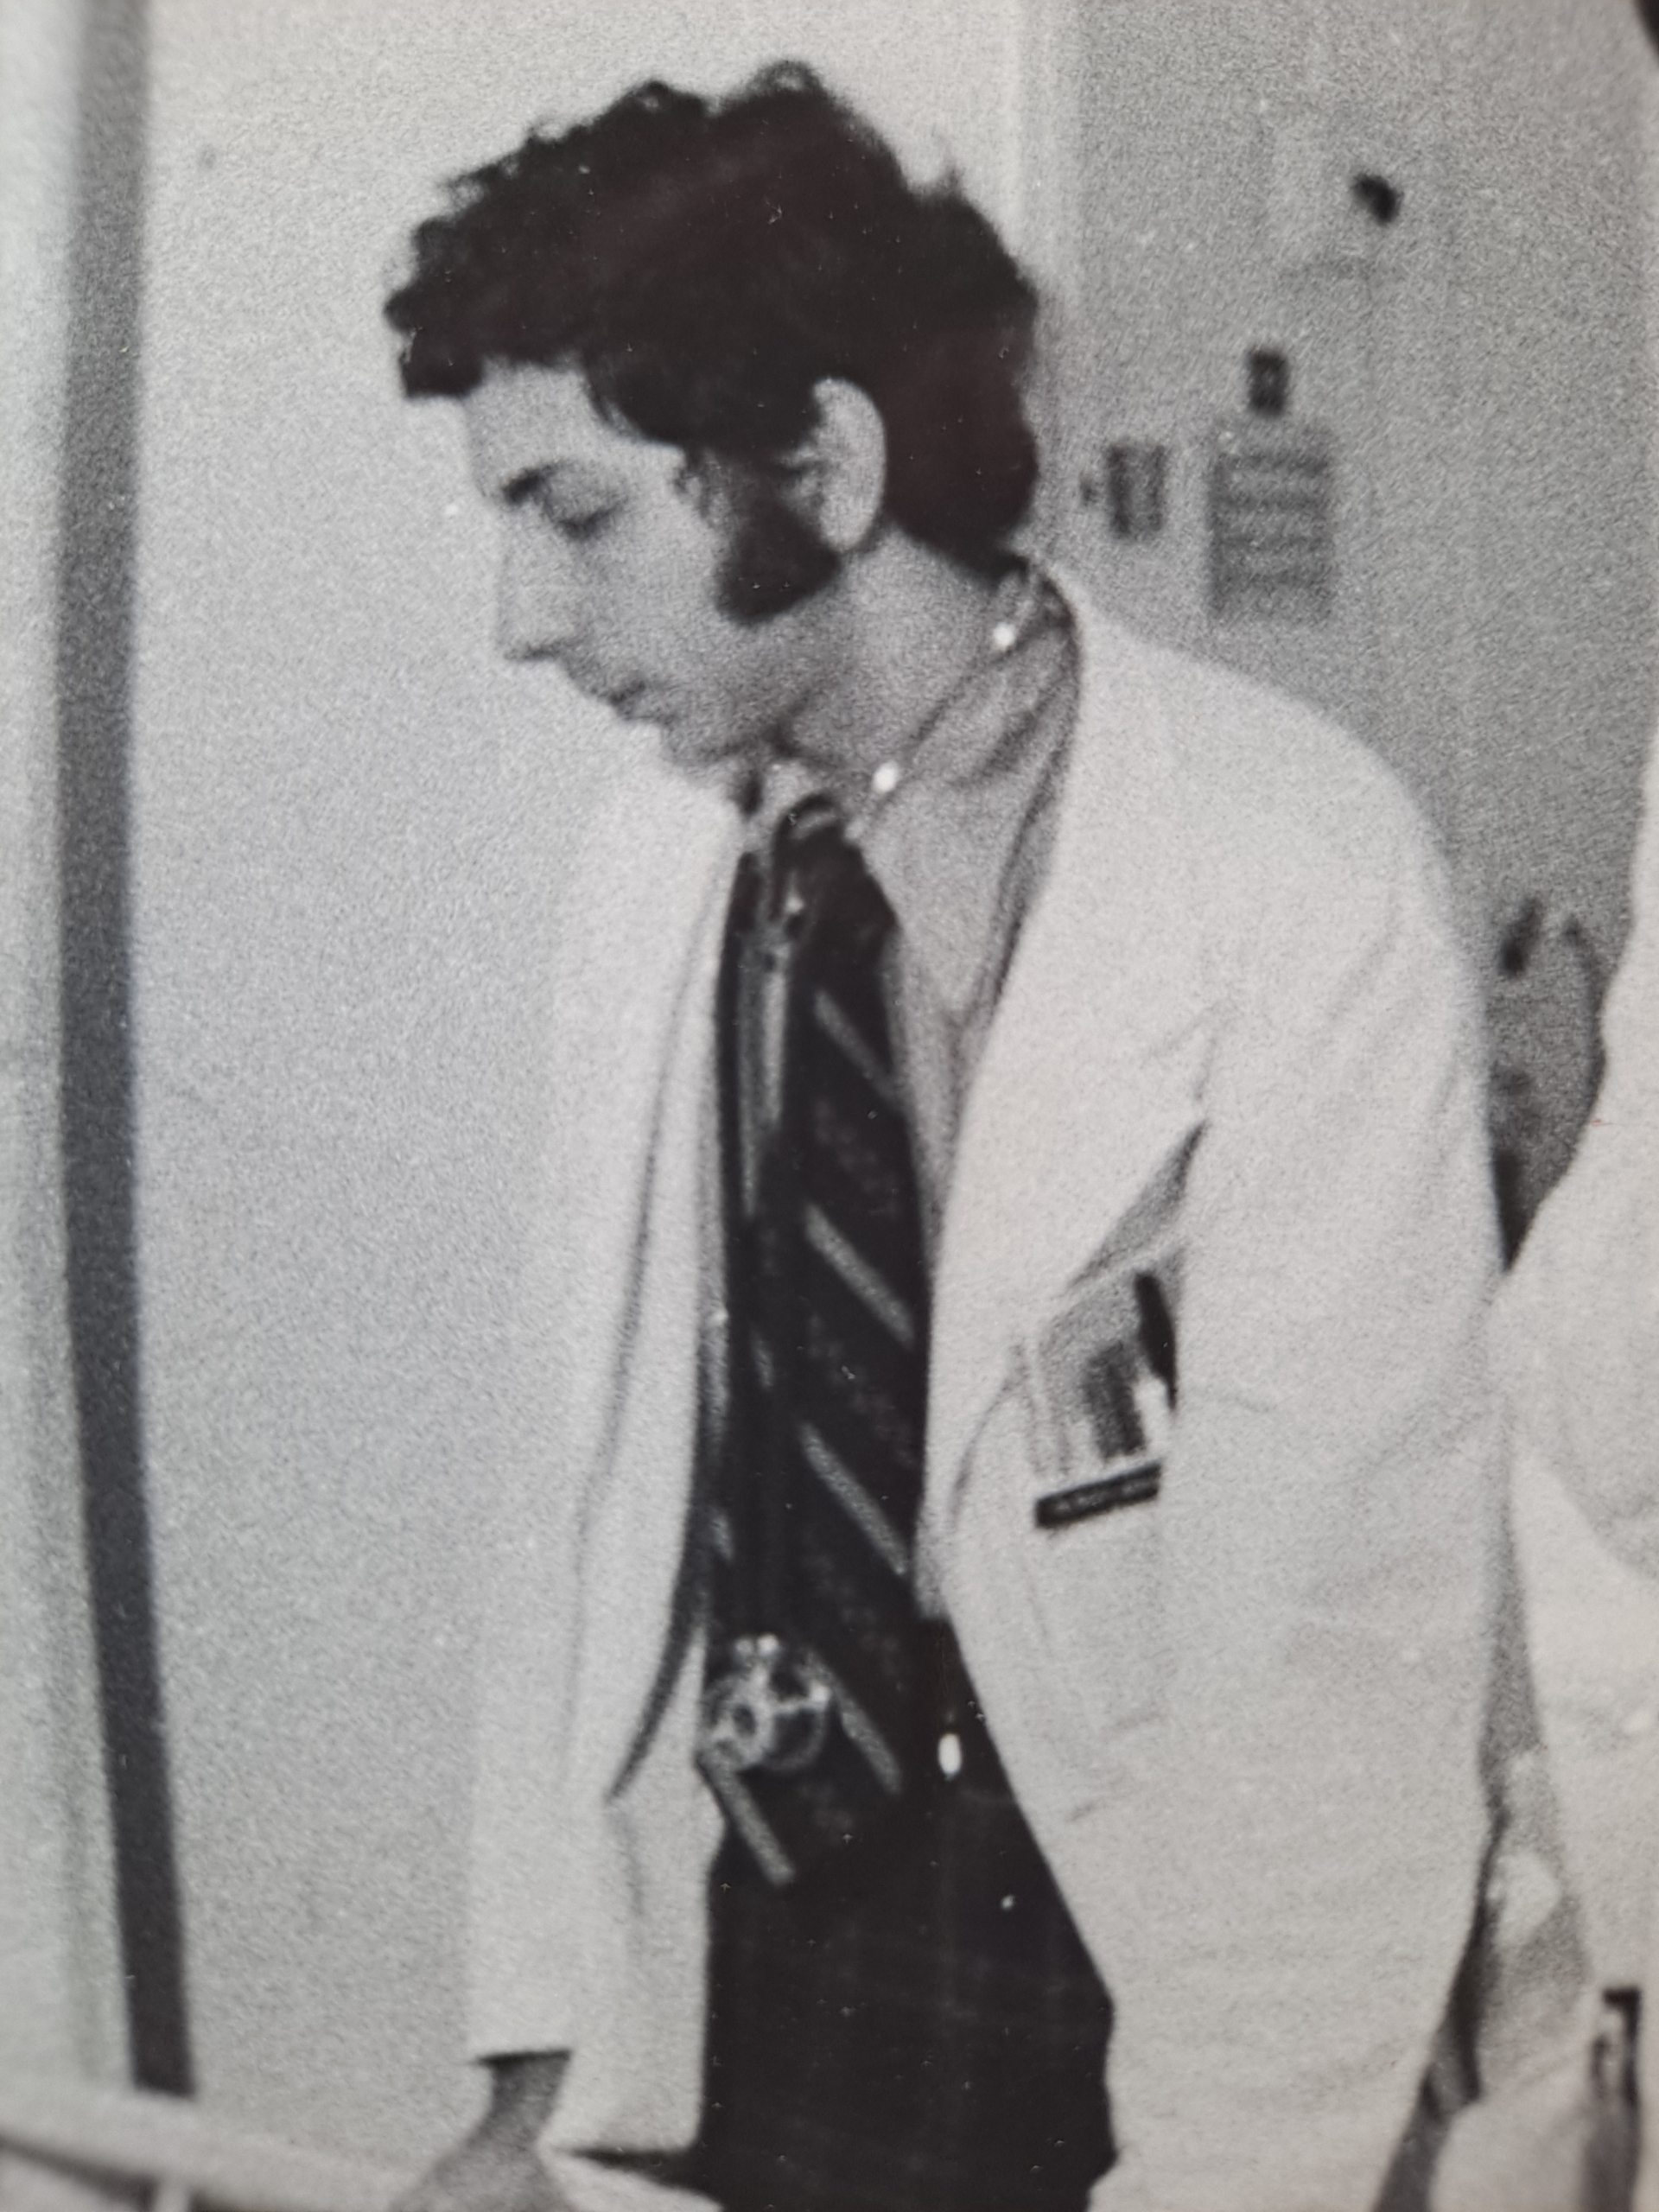 Weber as a medical resident at Massachusetts General Hospital, wearing white coat and stethescope.